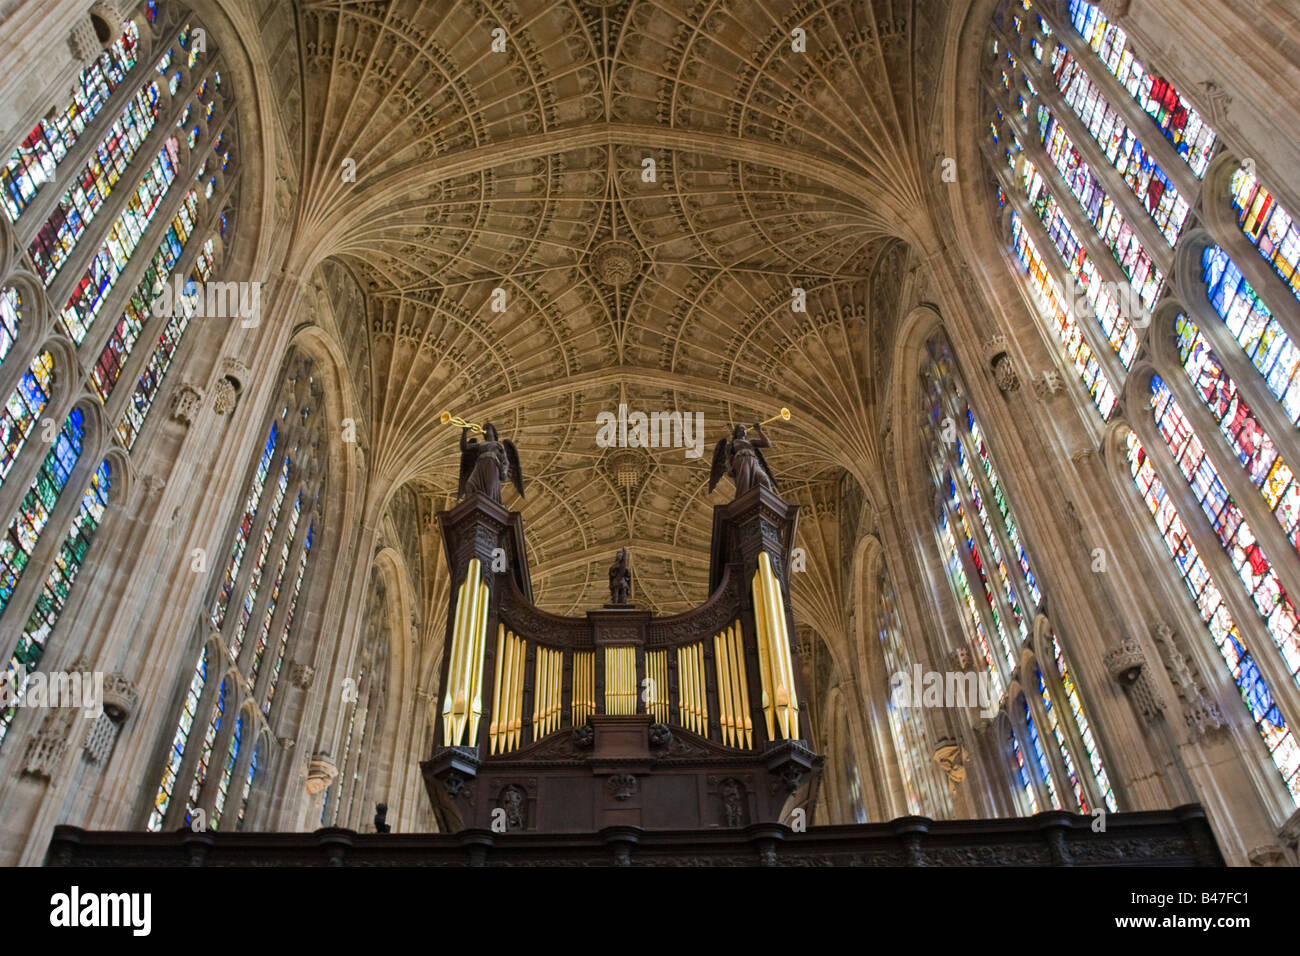 King's College Chapel vaulted ceiling and organ, Cambridge University Cambs GB UK Stock Photo